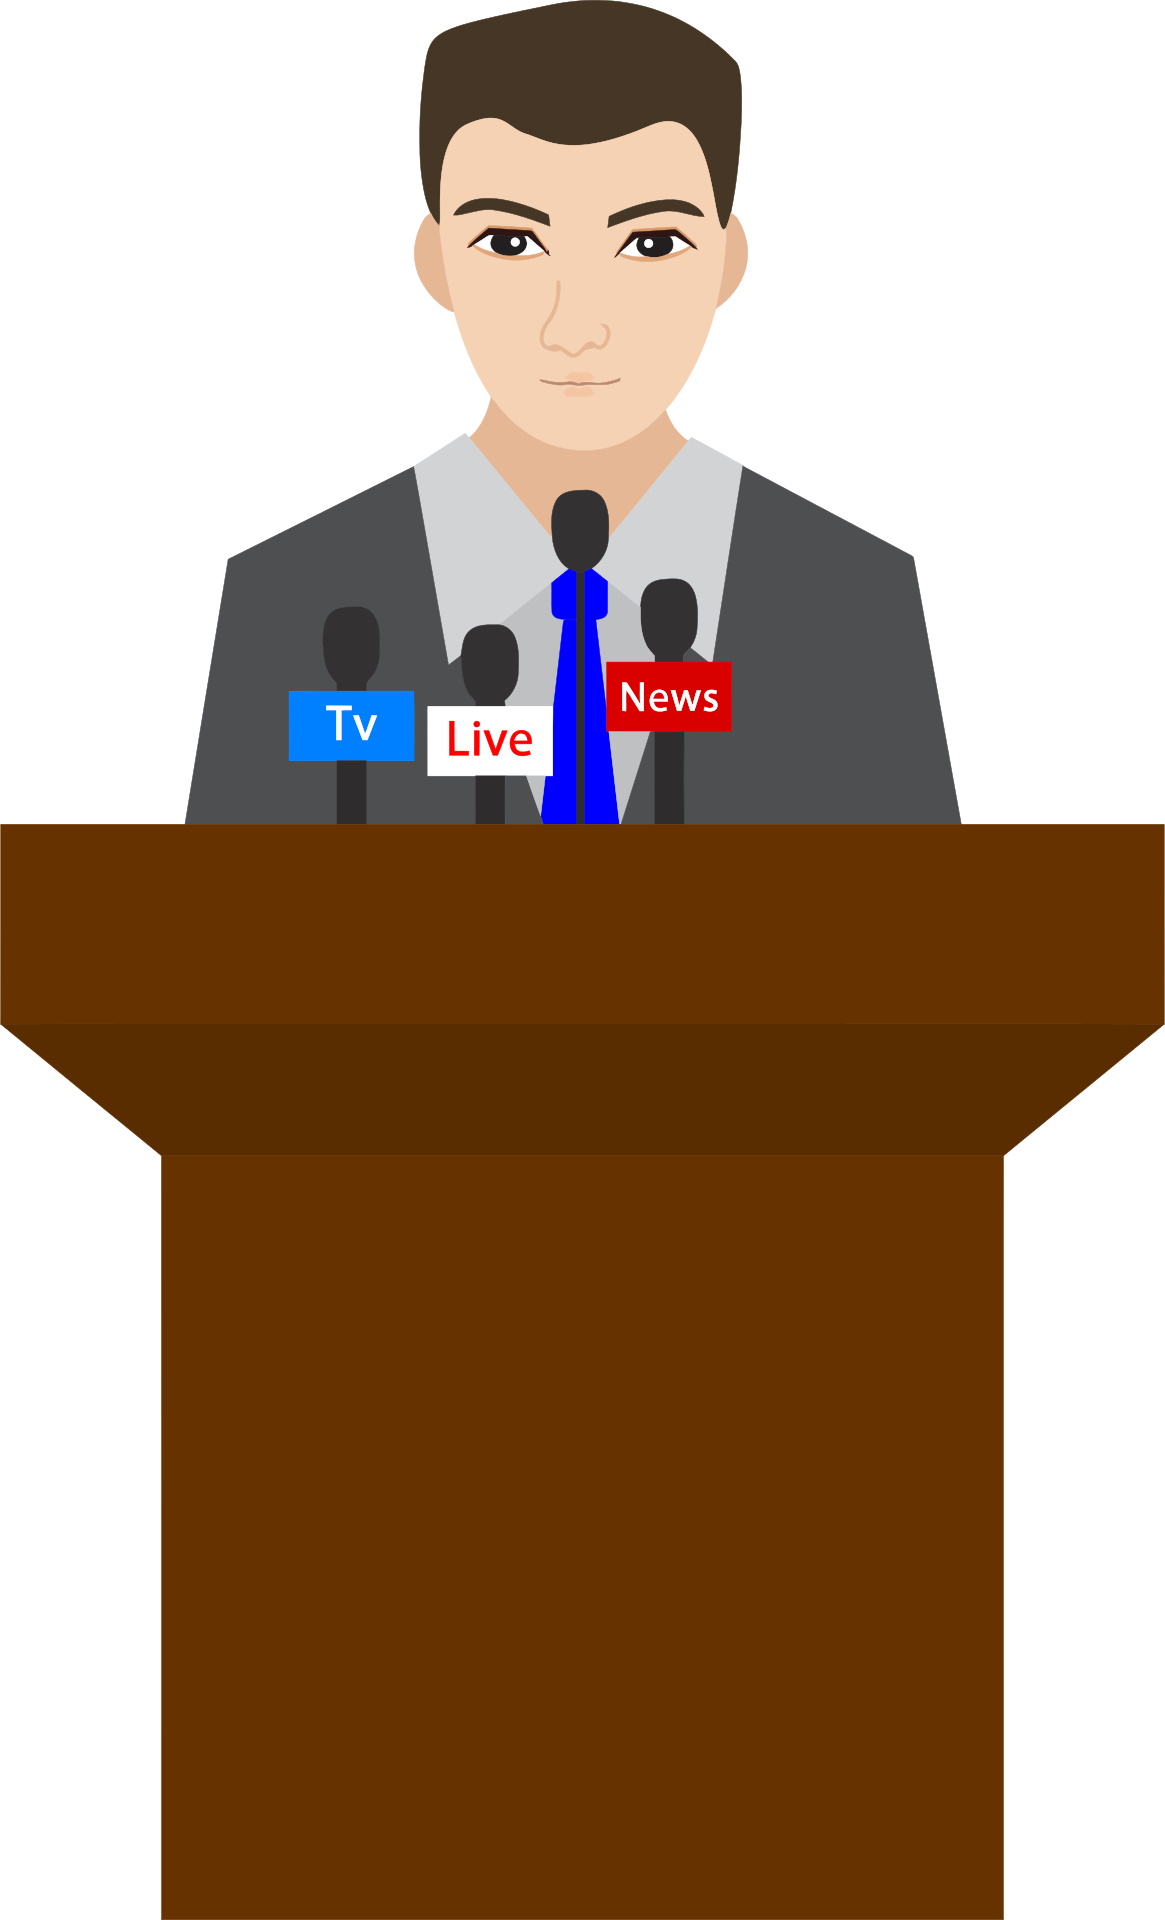 How To Master The Art Of Public Speaking - Man On Podium (1165x1920)